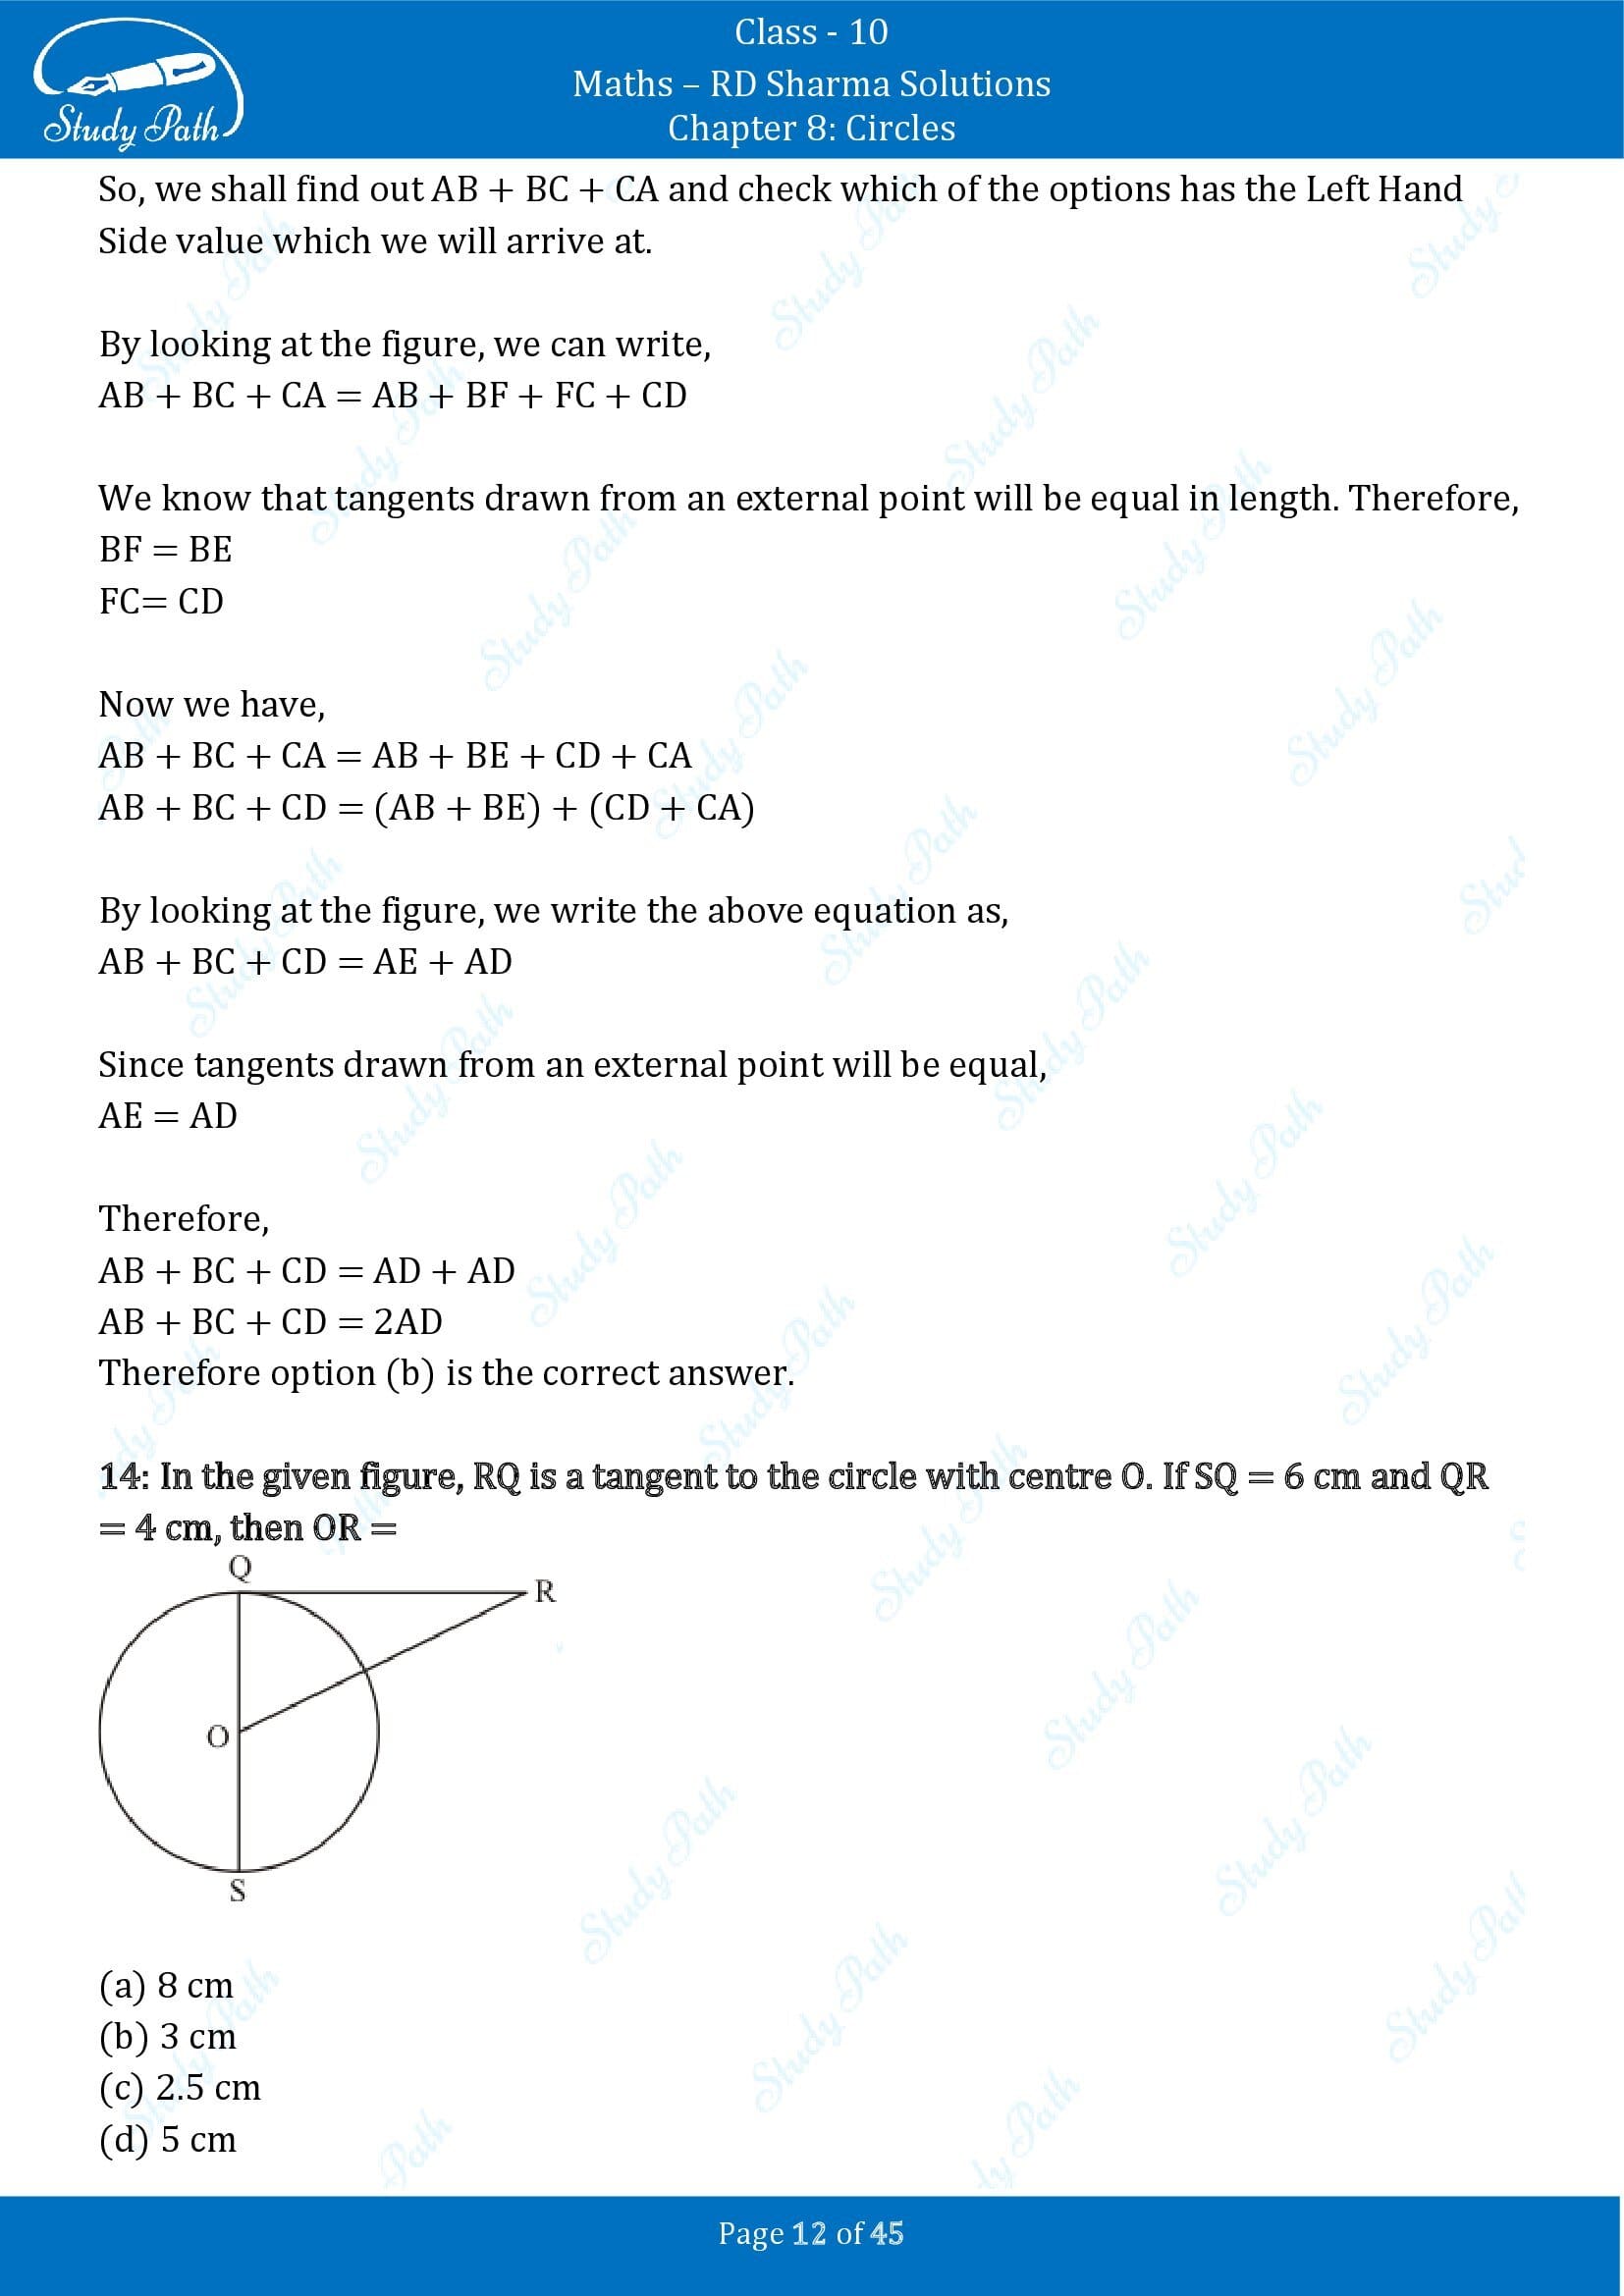 RD Sharma Solutions Class 10 Chapter 8 Circles Multiple Choice Questions MCQs 00012